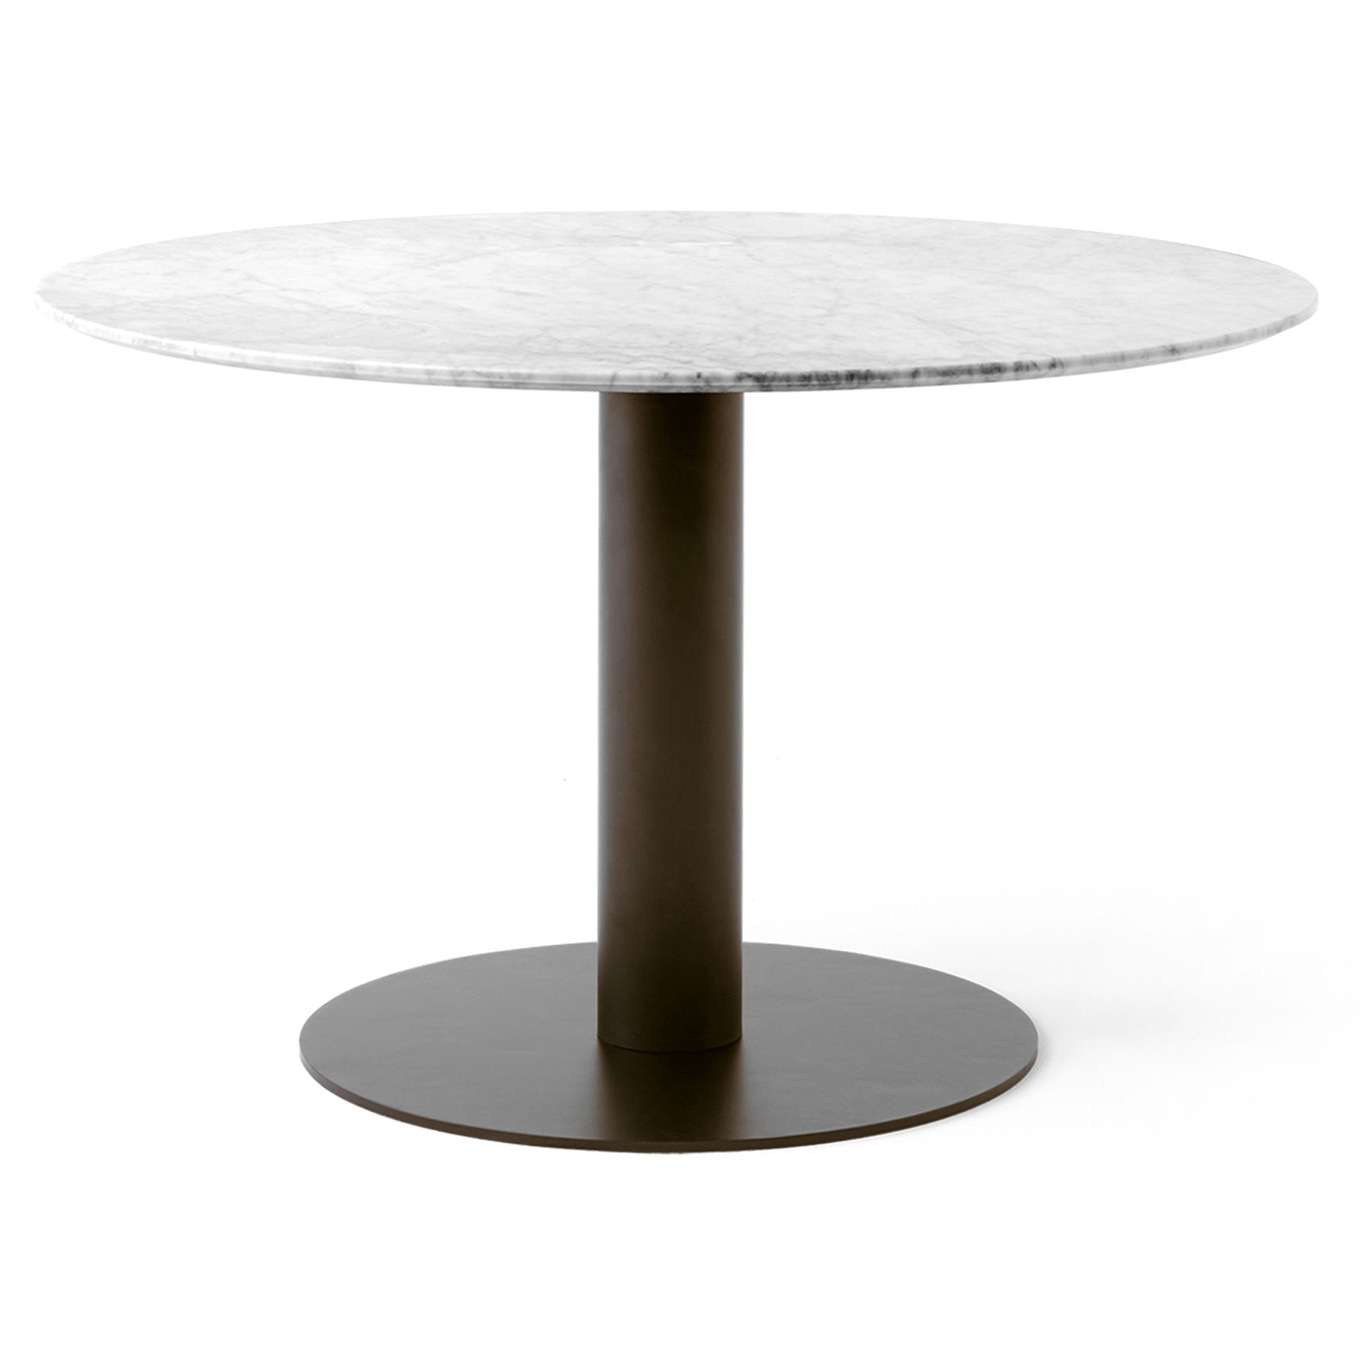 In Between SK19 Table 120cm, White Marble / Bronzed